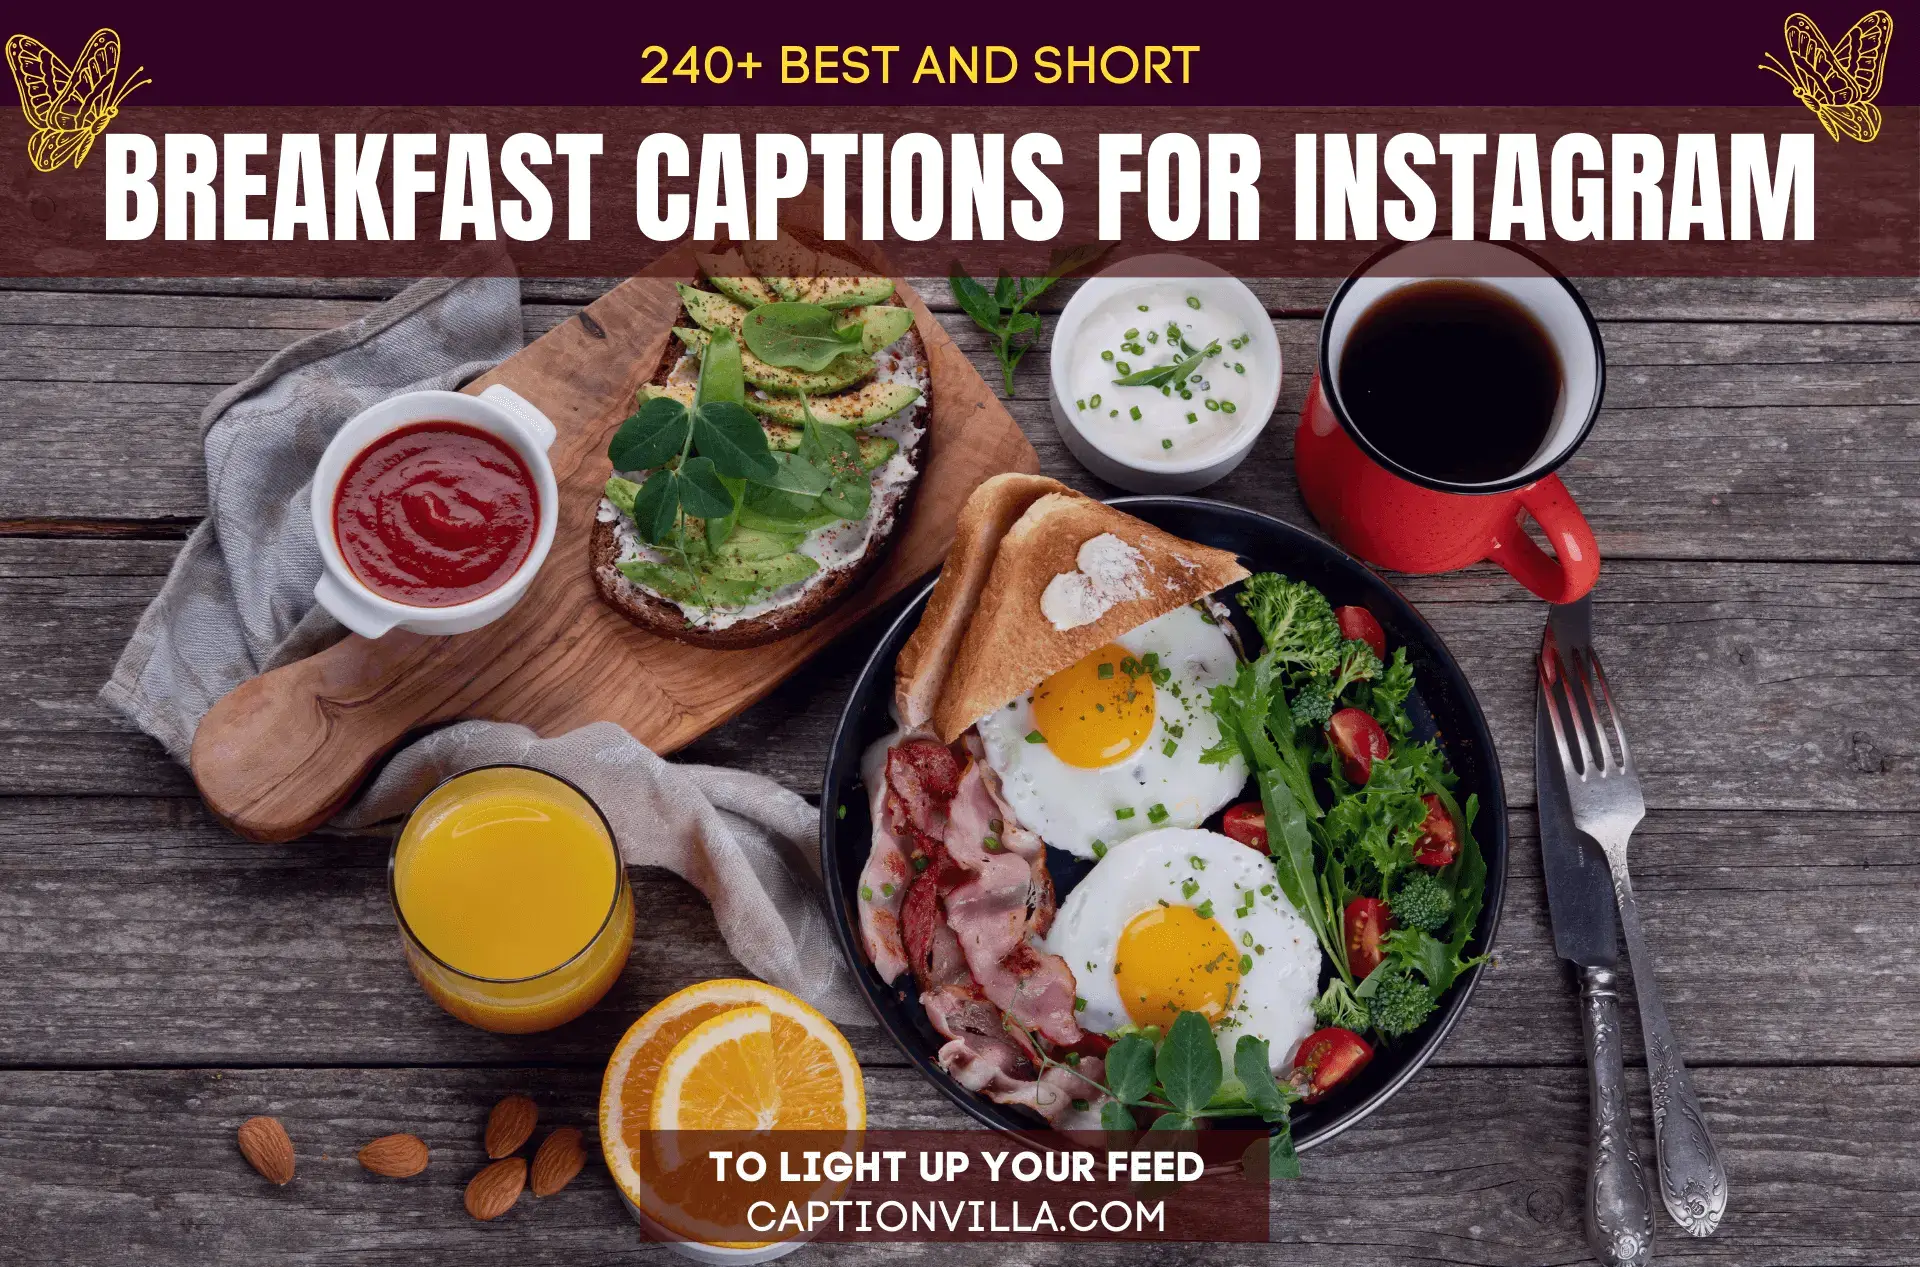 A colorful breakfast plate with a short caption for Instagram.